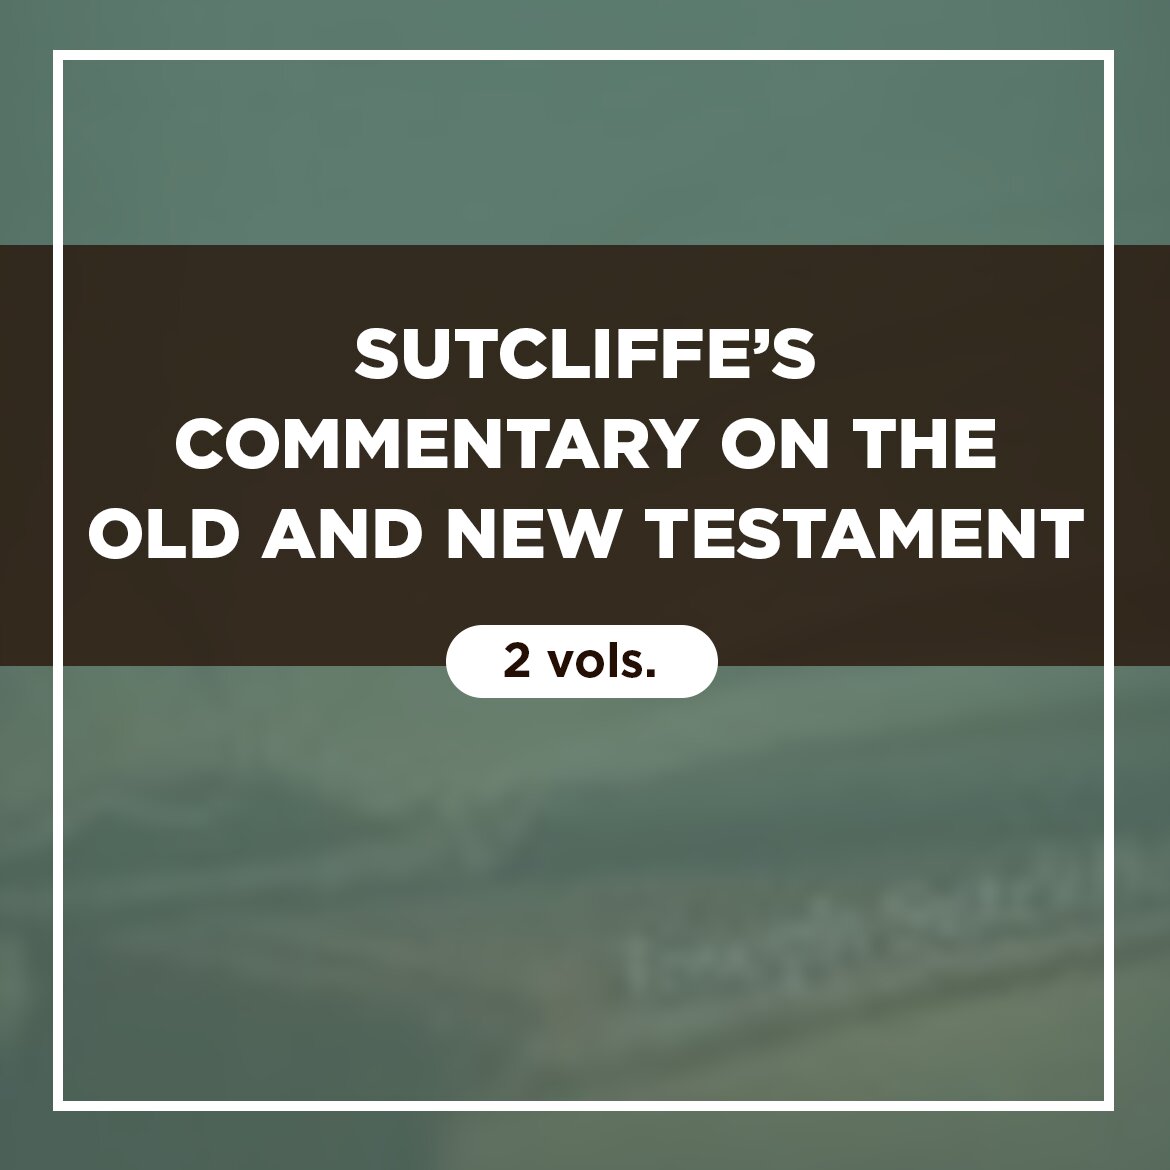 Sutcliffe’s Commentary on the Old and New Testament (2 vols.)